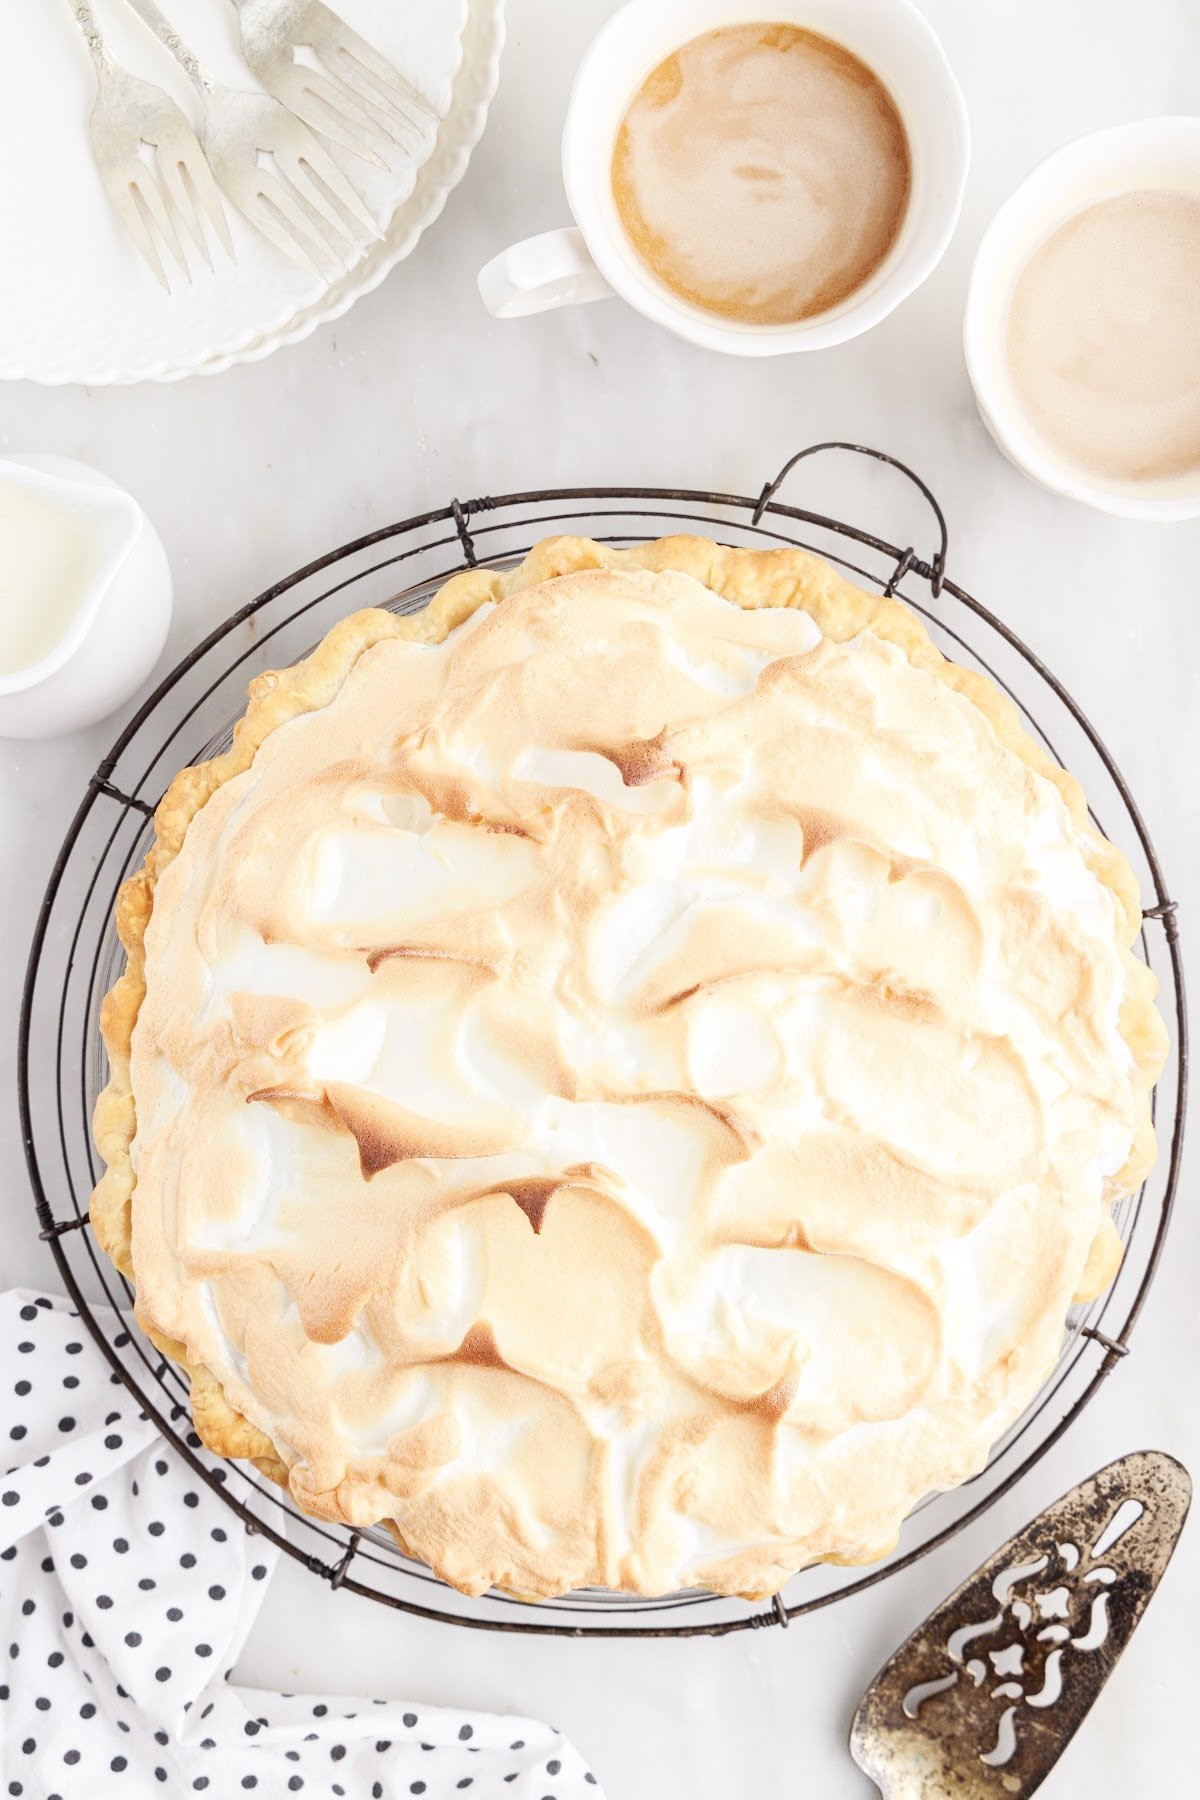 Baked pie with golden tops on the meringue.